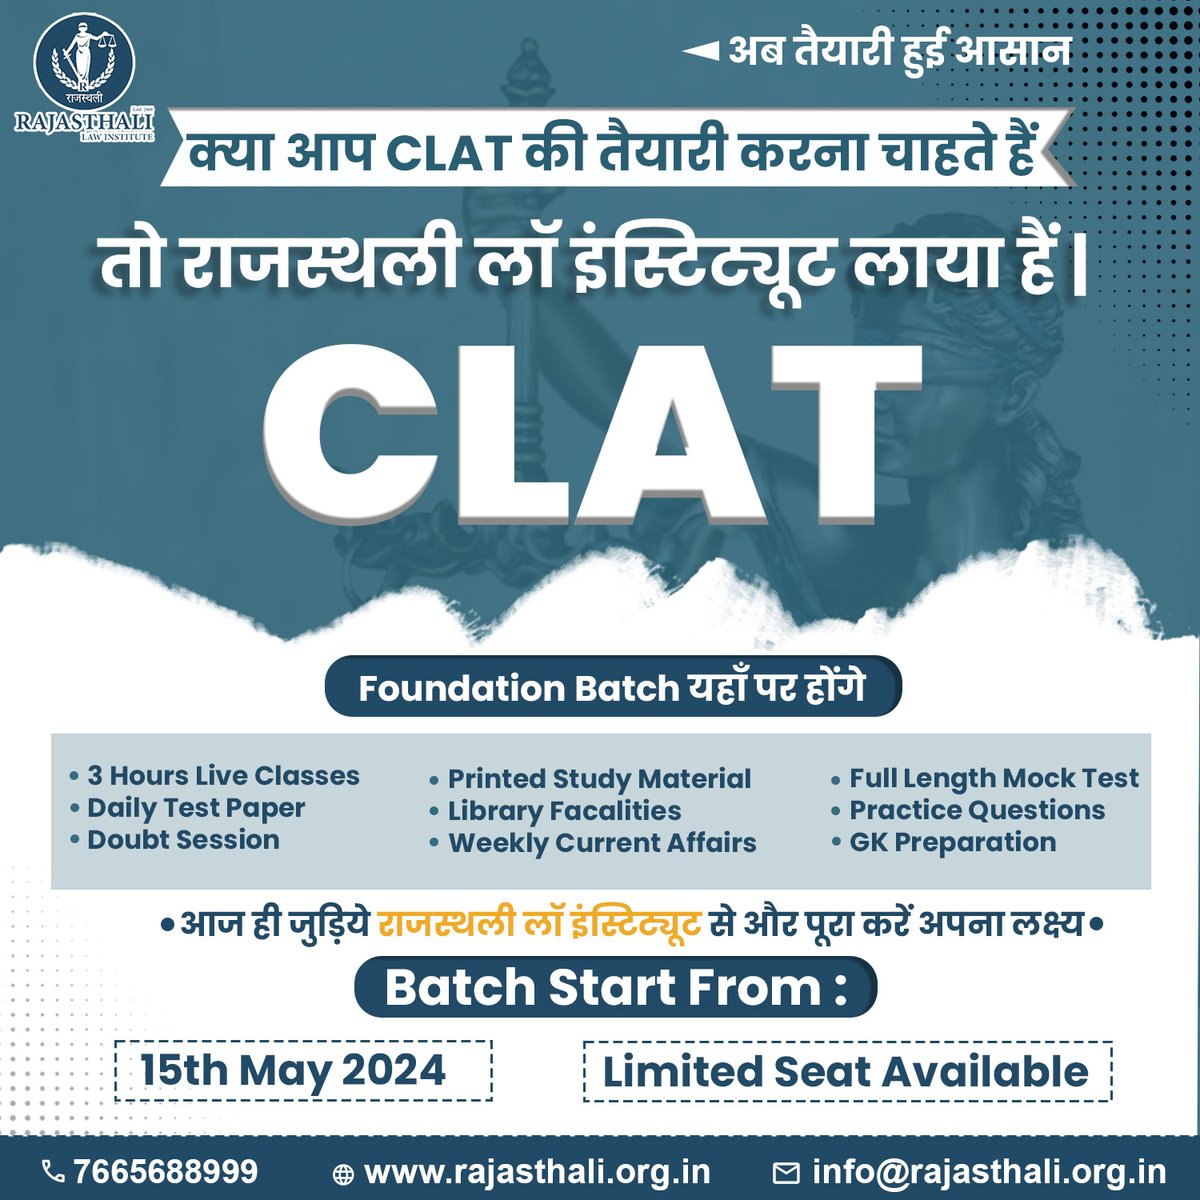 📷Are you interested in preparing for CLAT? 📷
📷Then Rajasthali Law Institute has brought it for you.
CLAT
📷Batch Starts From:
📷15th May 2024#RajasthaliLawInstitute #RJSCoaching #APOCoaching #JudiciaryExamPrep #Jaipur #LawCareer #FoundationBatch #LegalEducation